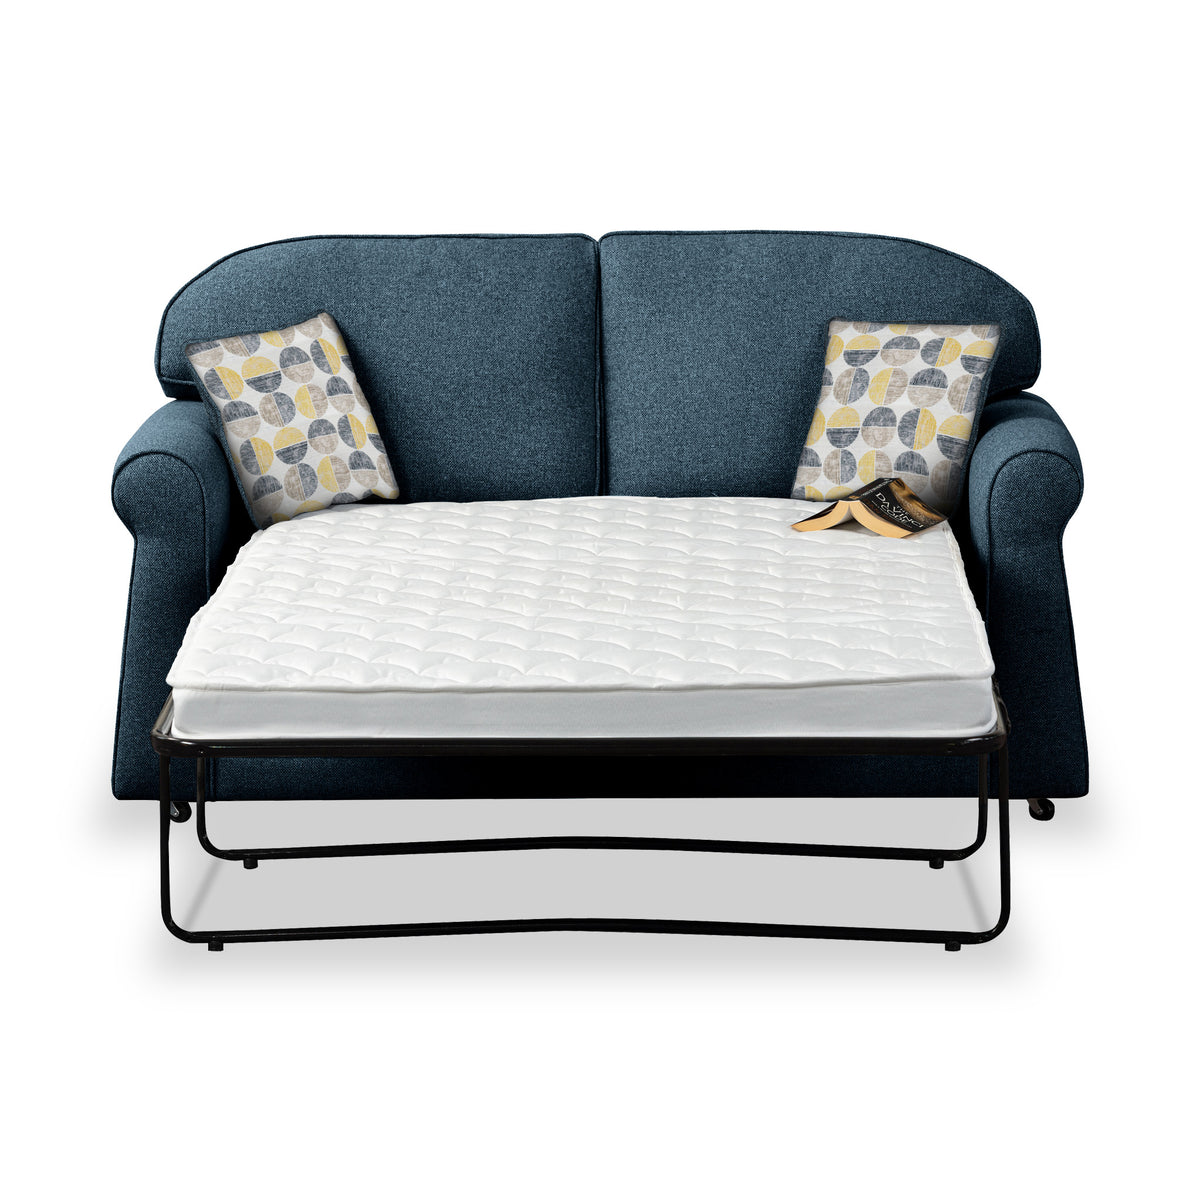 Giselle Midnight Soft Weave 2 Seater Sofabed with Beige Scatter Cushions from Roseland Furniture